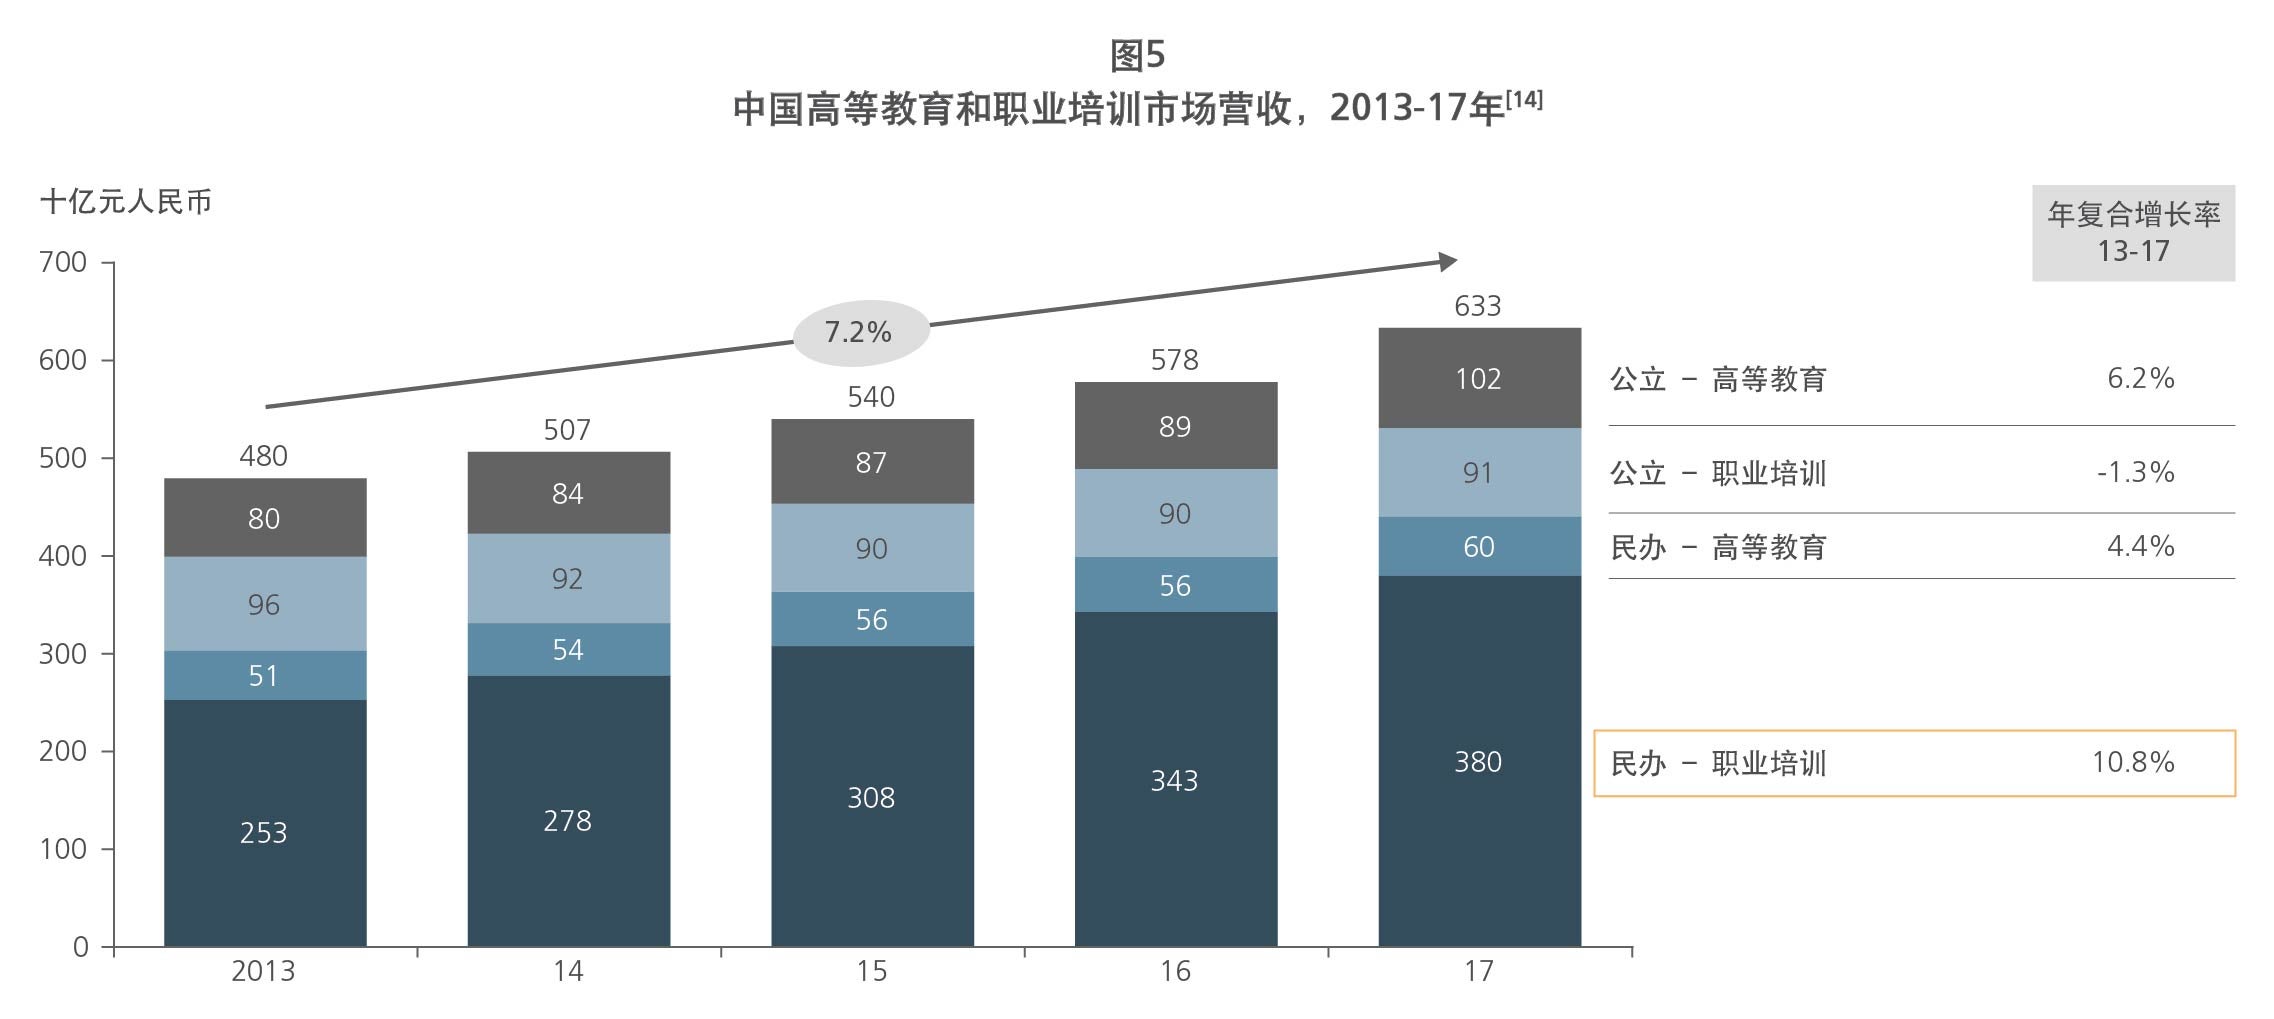 Revenue of Chinese higher and vocational education market 2013-17